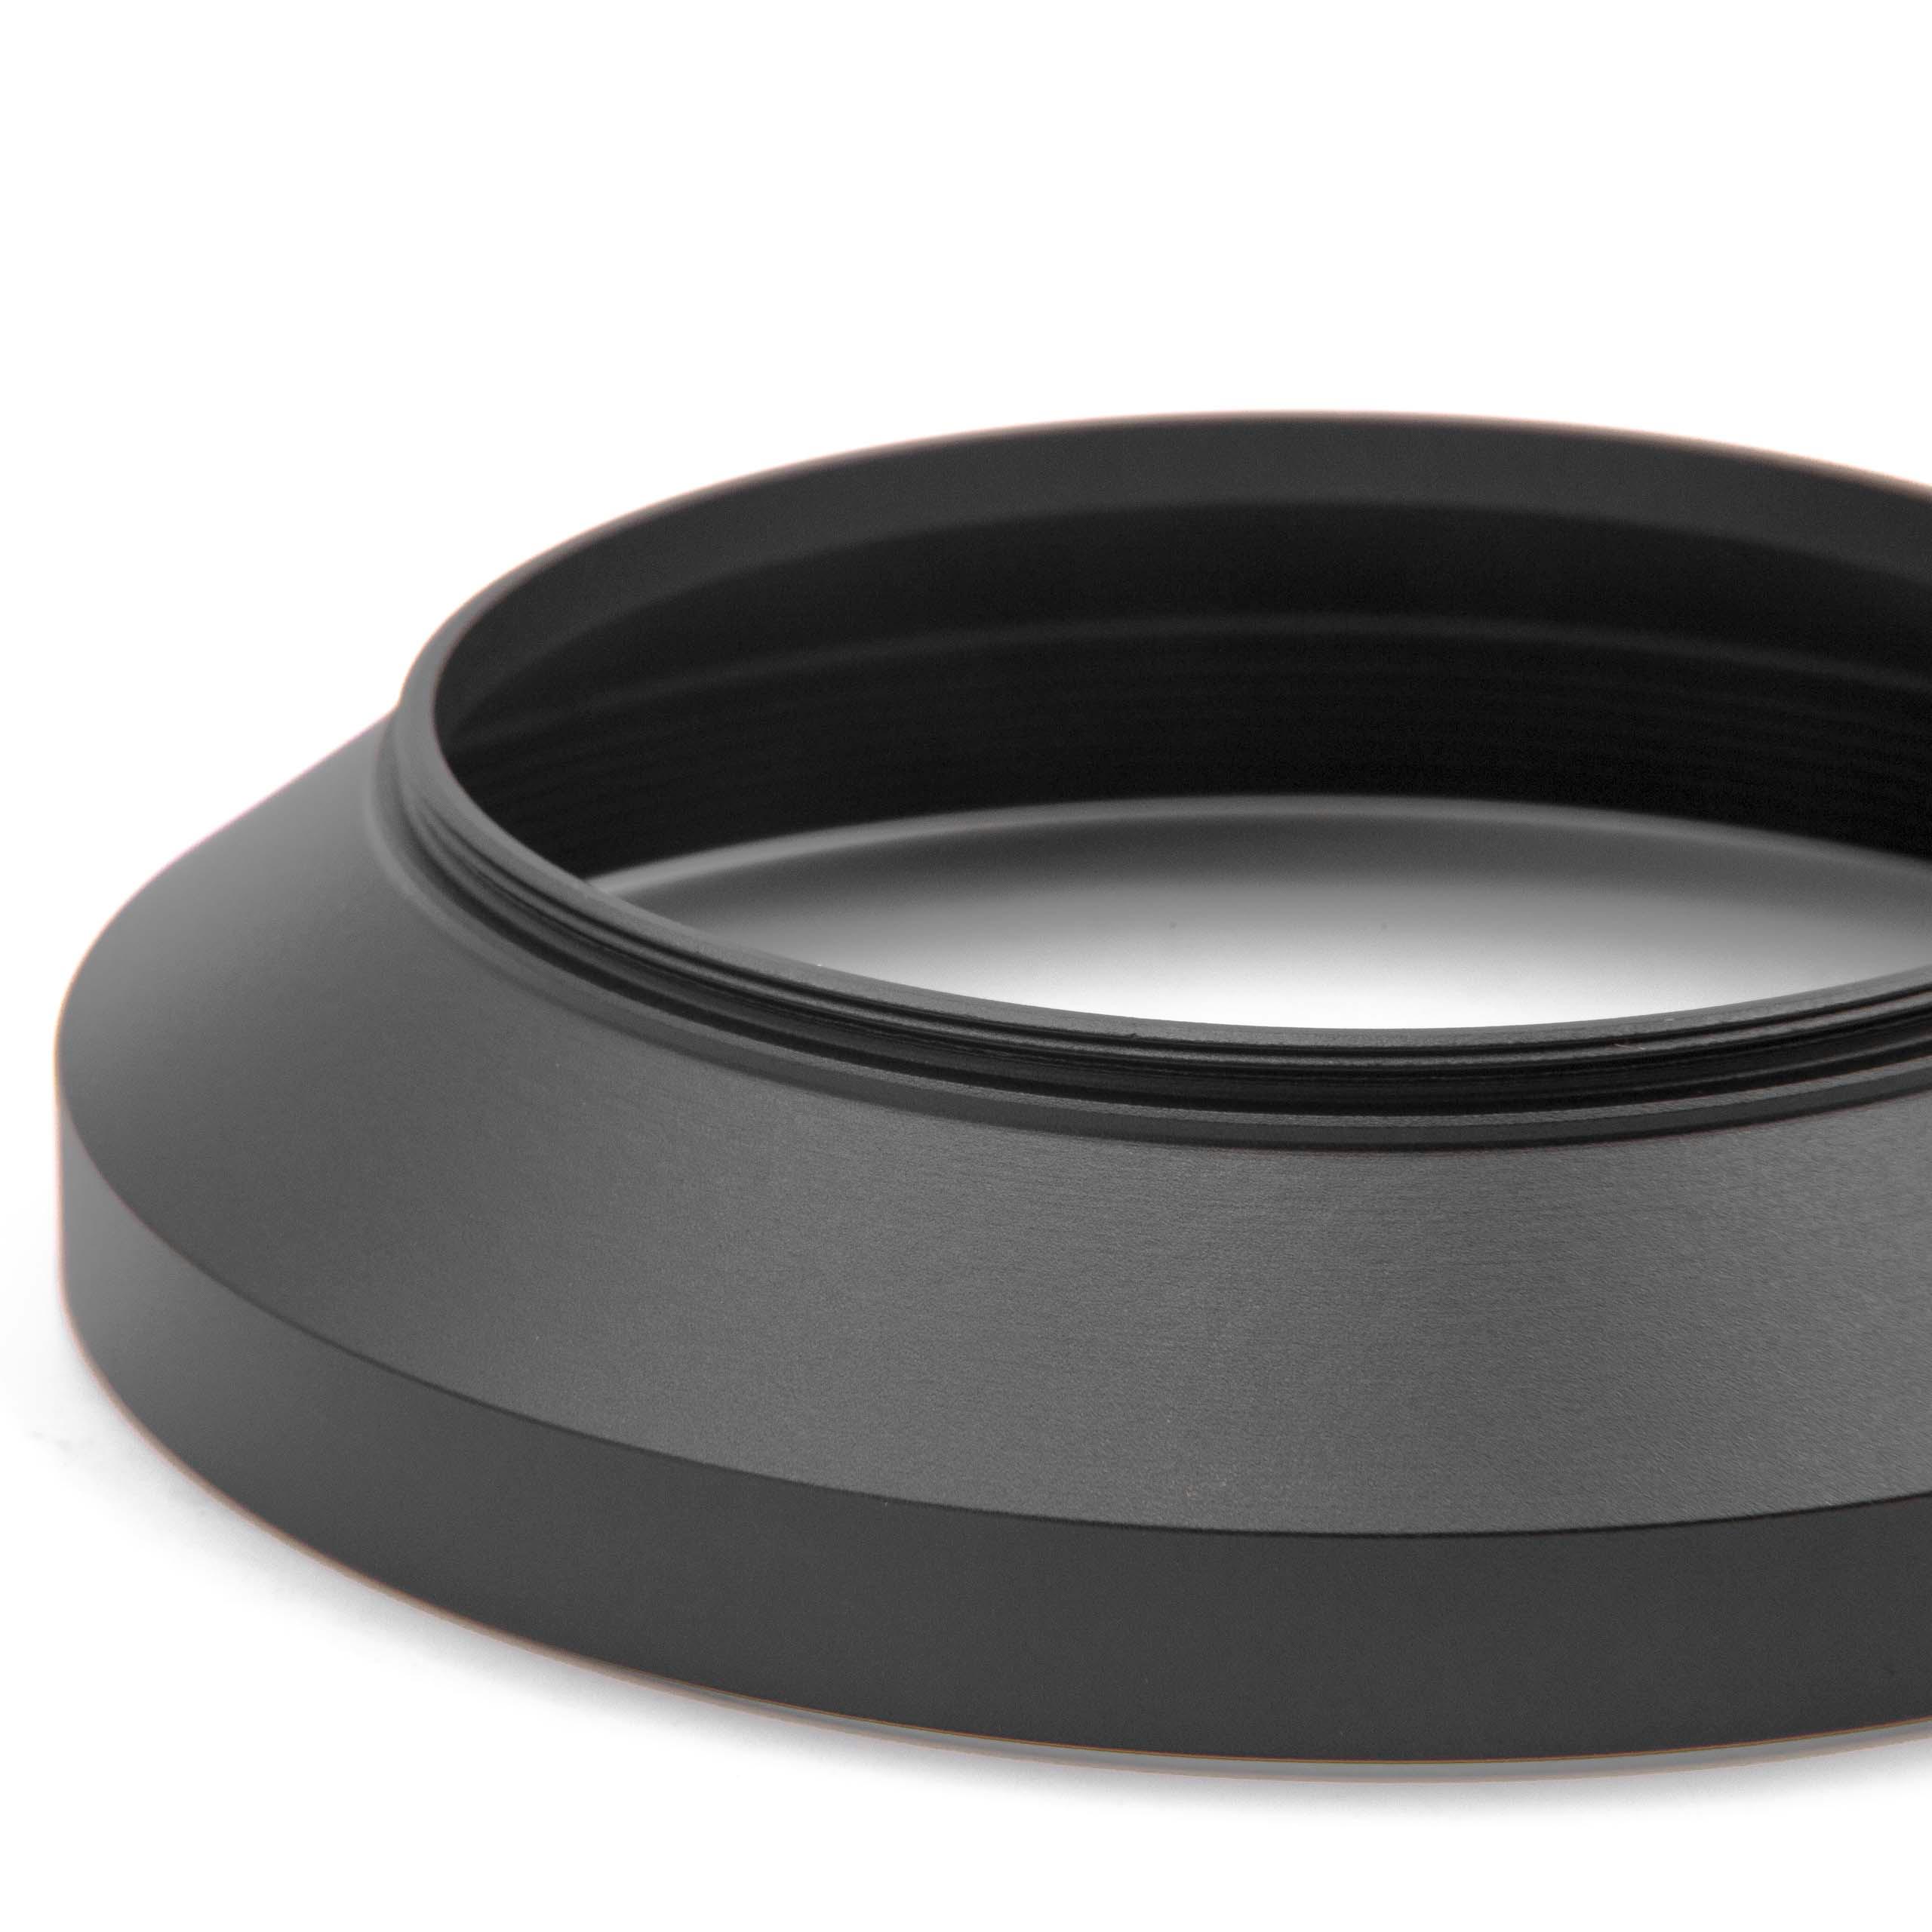 Lens Hood suitable for 72mm Lens - Wide-Angle Lens Shade Black, Round